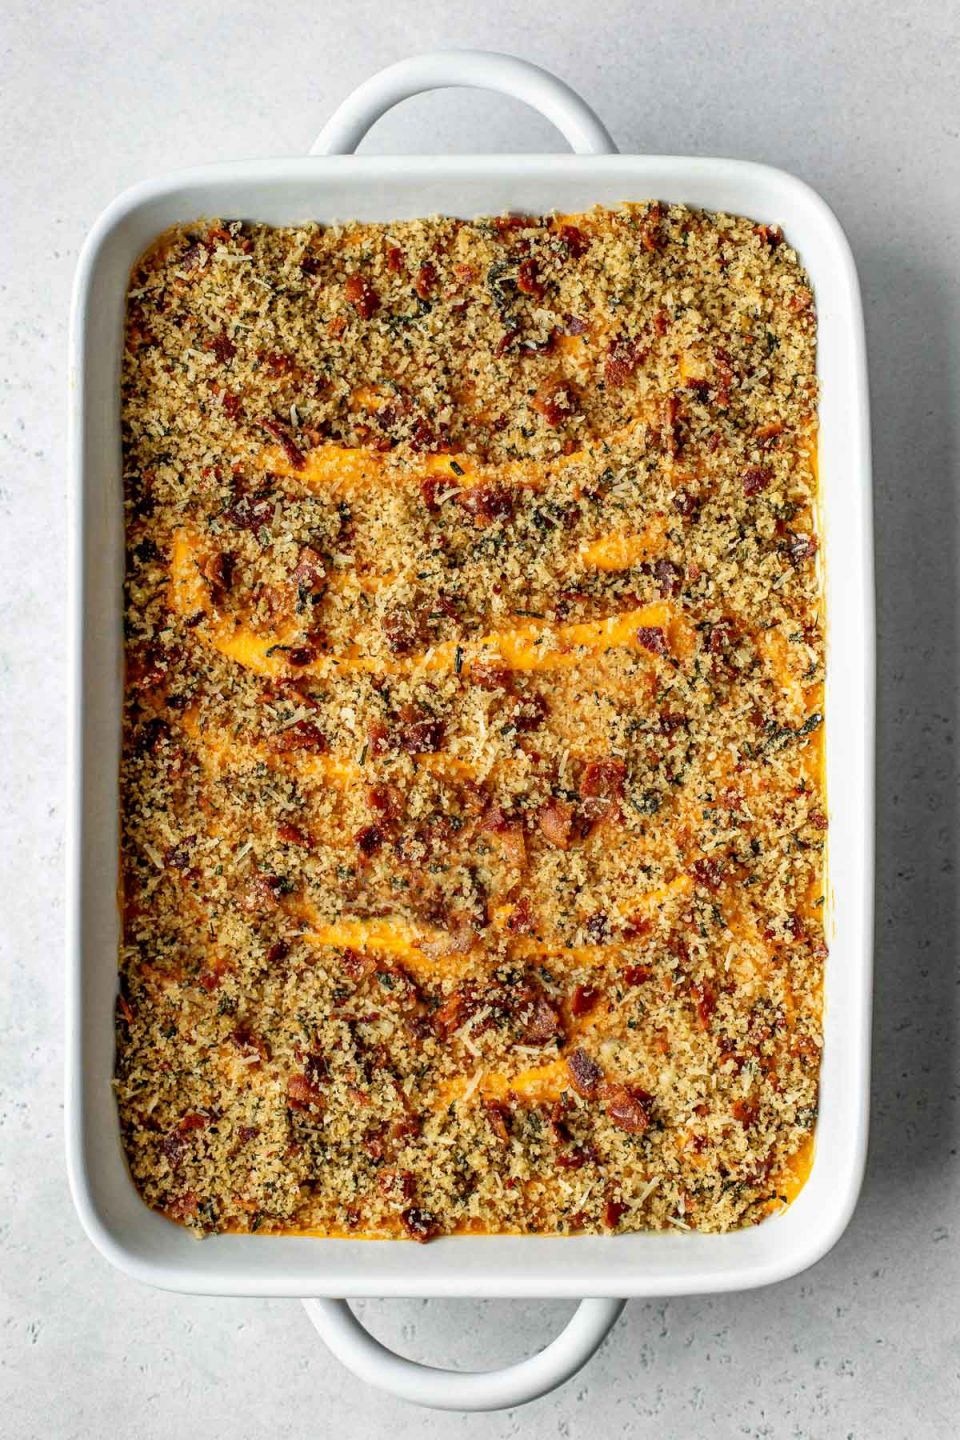 An overhead shot of a baking dish filled with assembled and baked Savory Sweet Potato Casserole topped with bacon breadcrumb topping. The baking dish sits atop a creamy white textured surface.